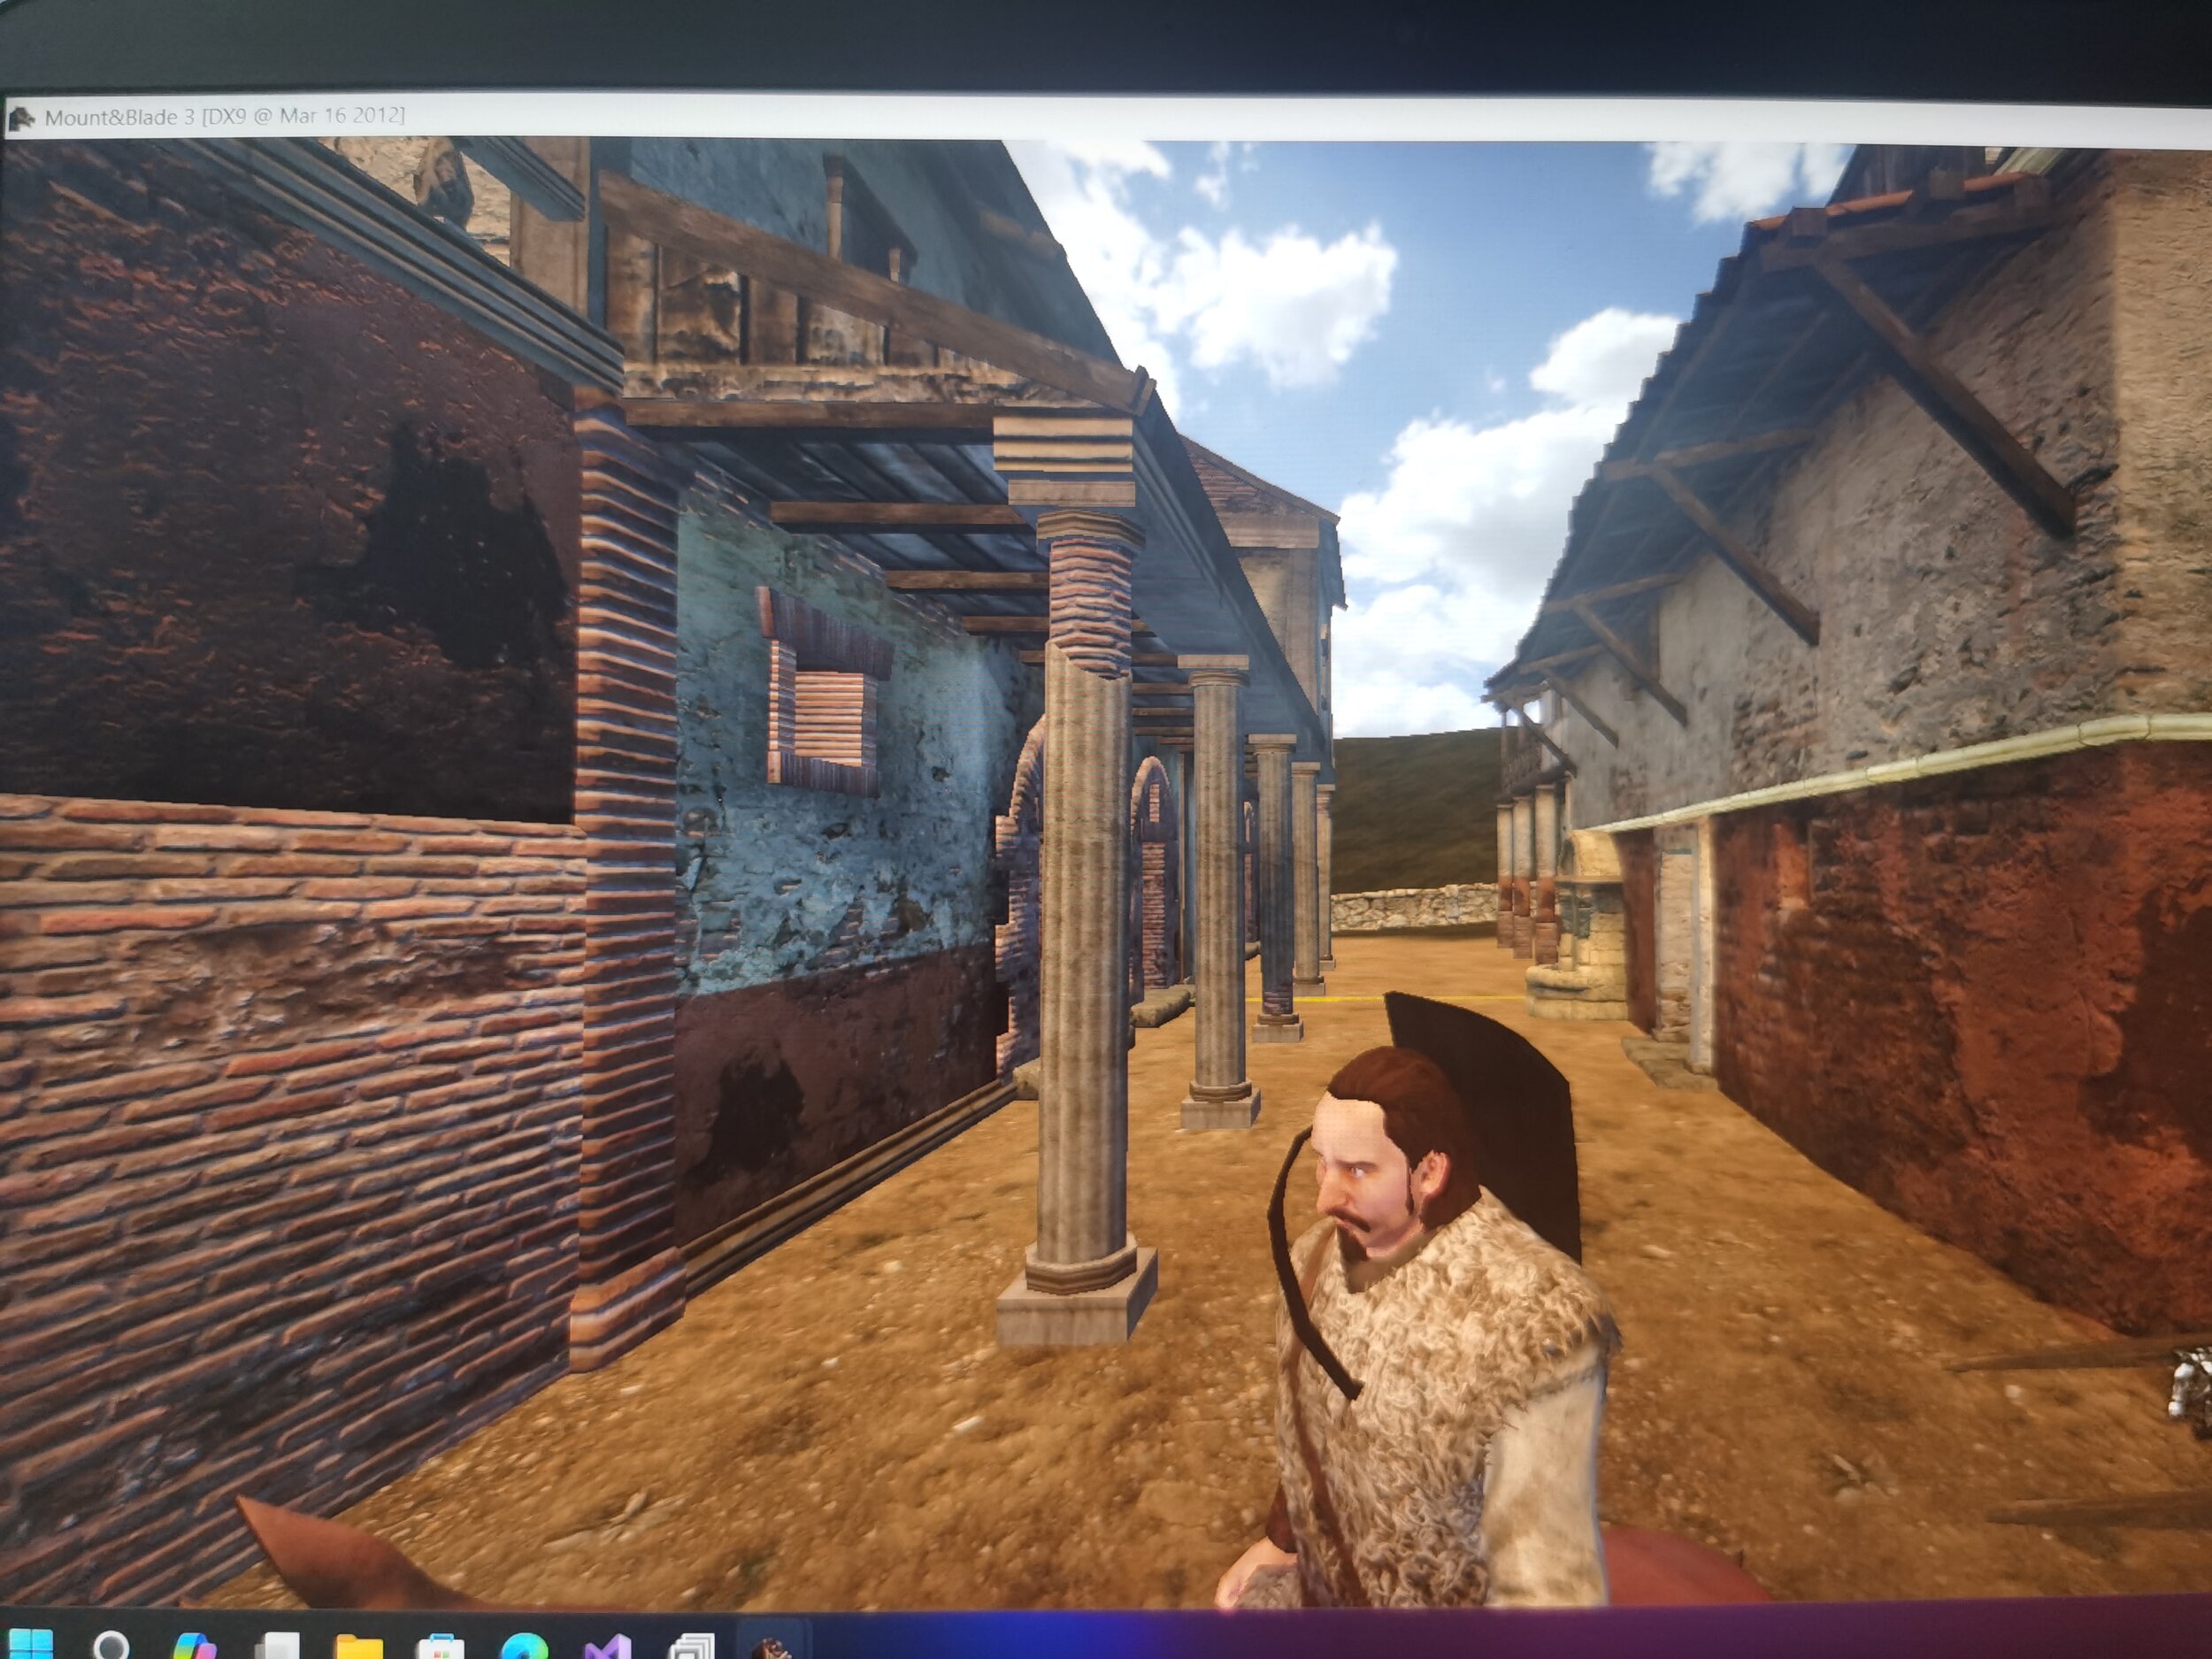 5a37069a-3e0b-4676-afa1-203e6a920844 - [RELEASE] Mount & Blade - Game Engine and Game full source code - RaGEZONE Forums